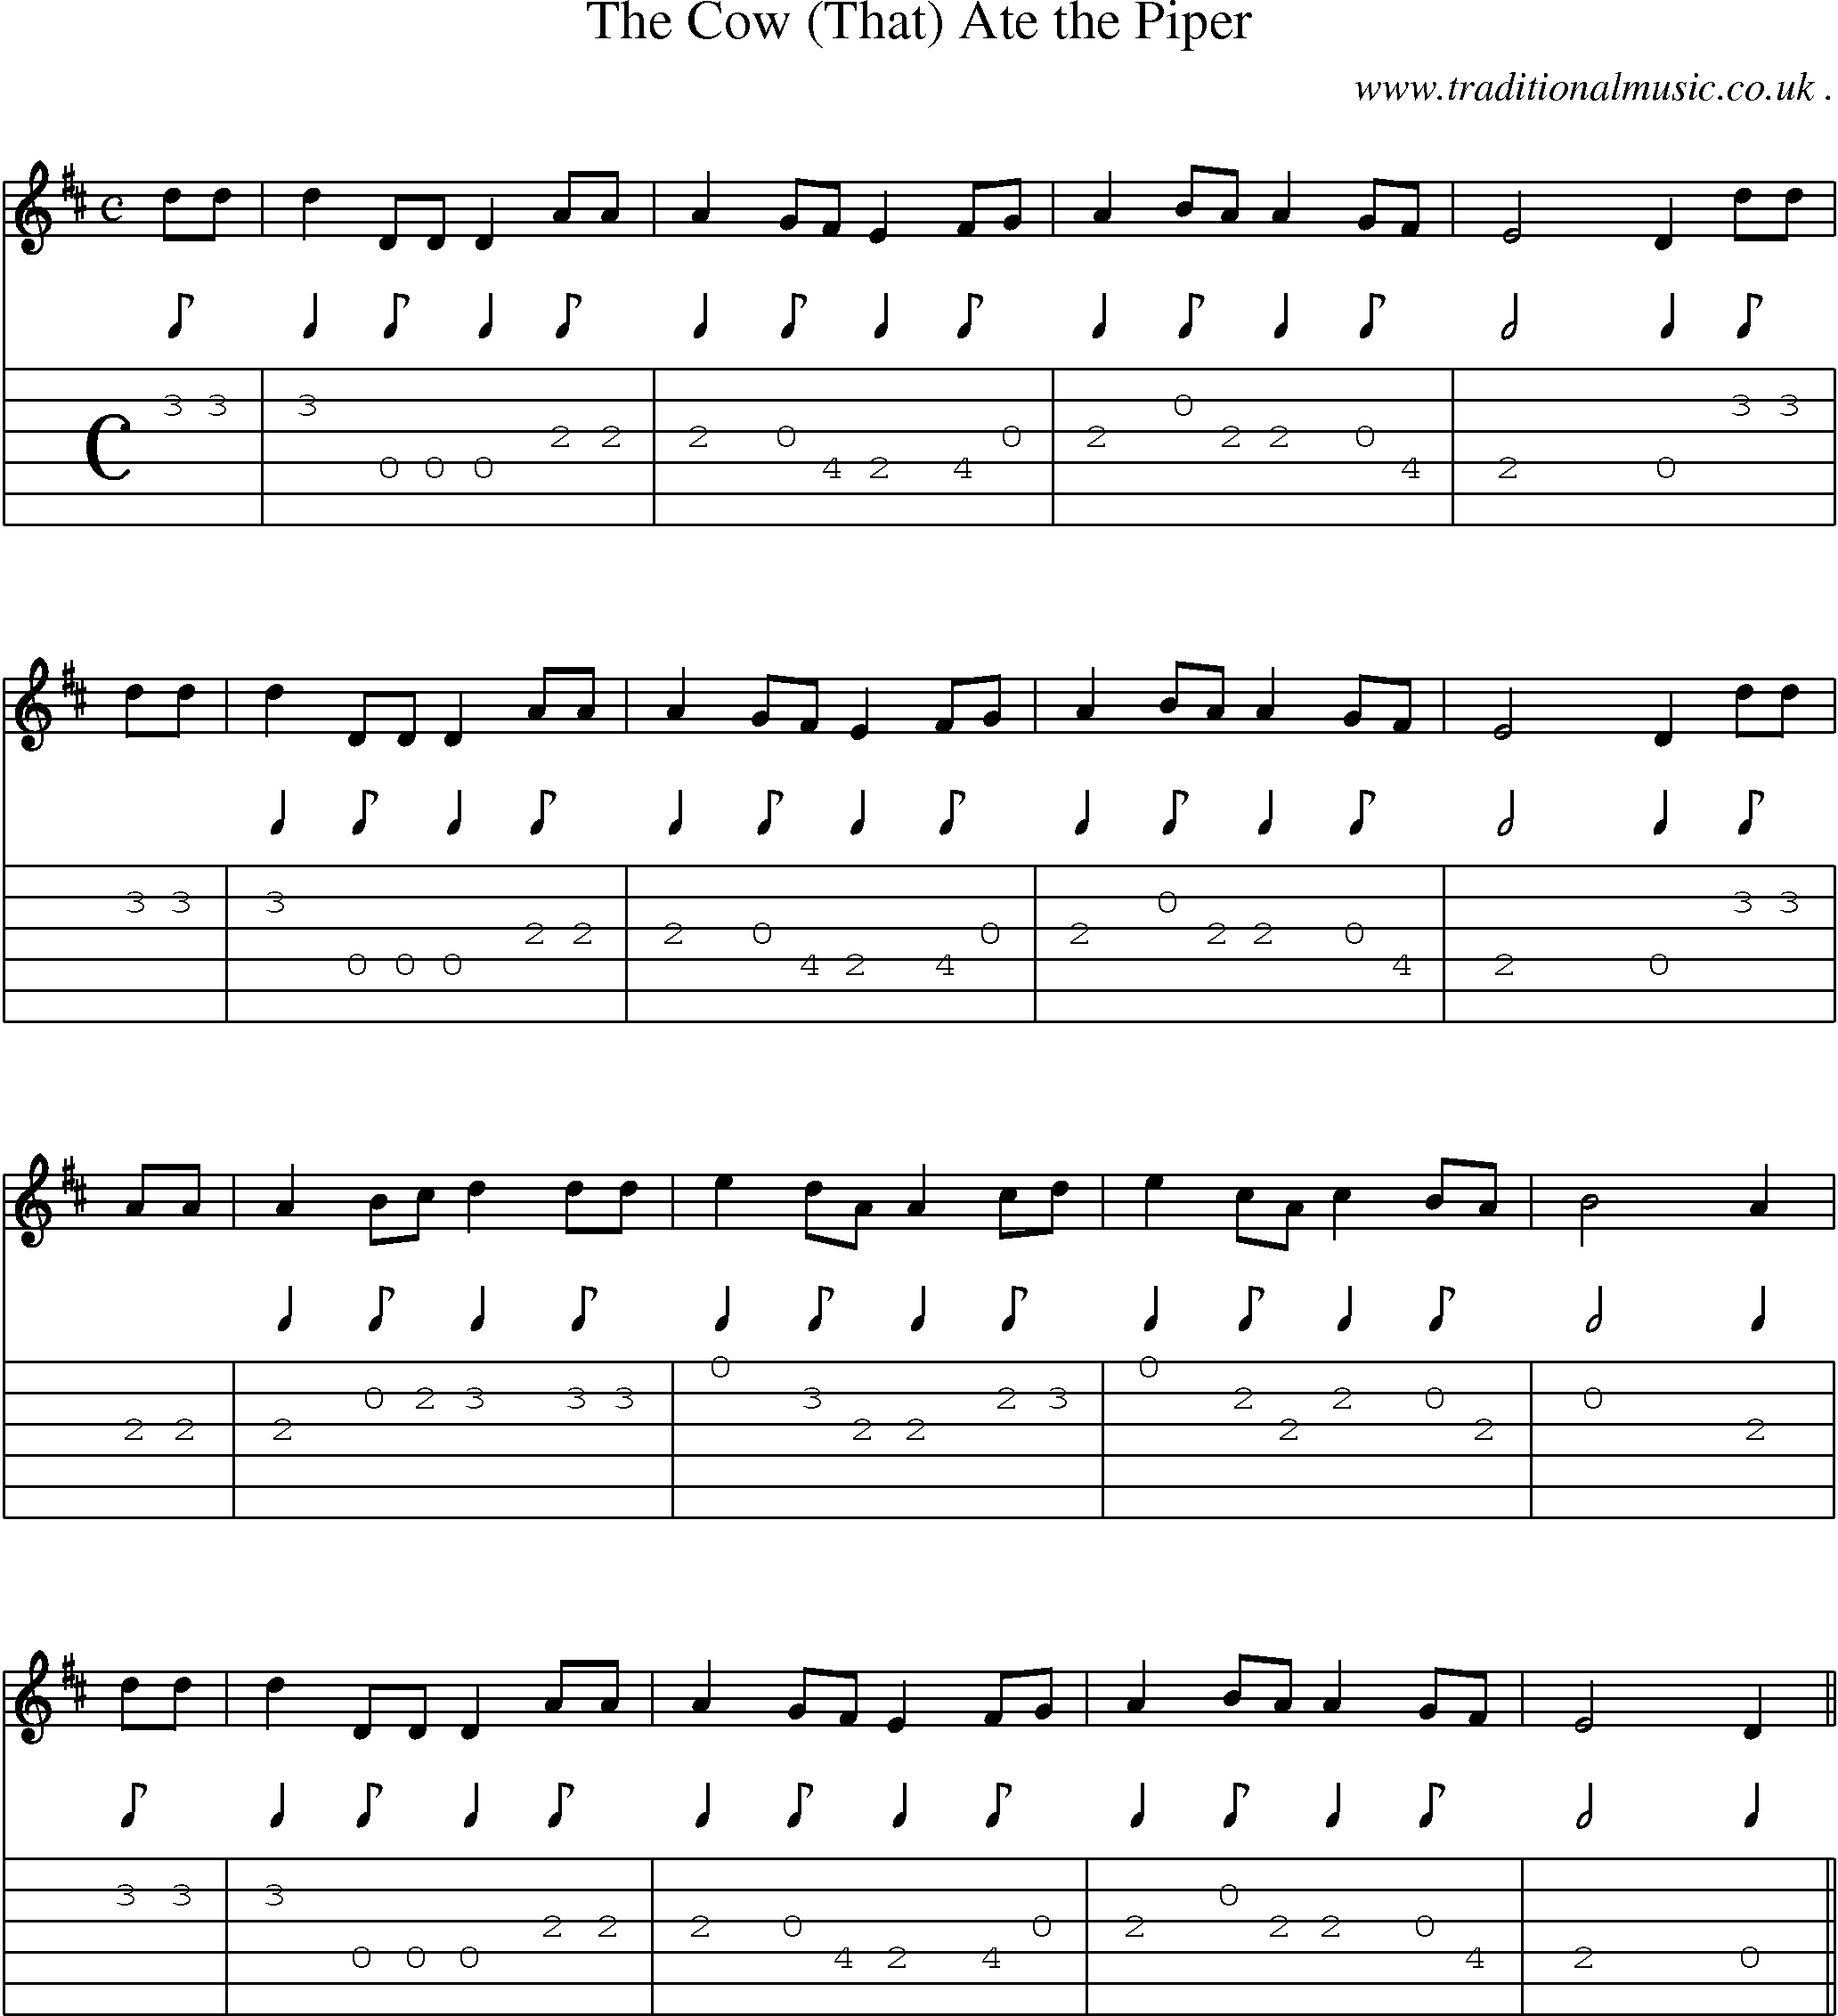 Sheet-Music and Guitar Tabs for The Cow (that) Ate The Piper